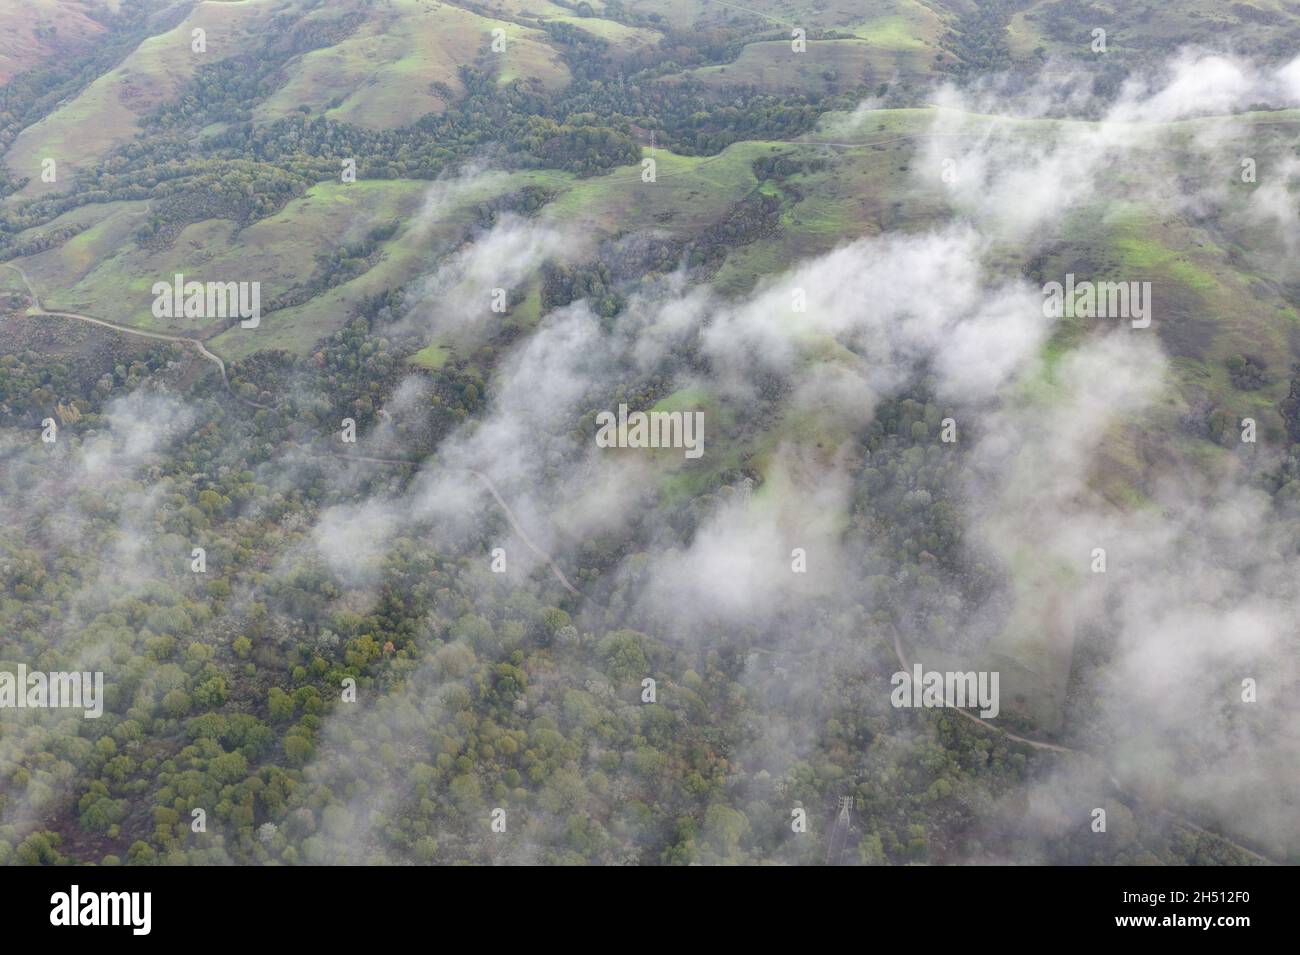 Low clouds drift across the rolling hills found east of San Francisco Bay, CA. This dry region turns green during the winter months due to rain. Stock Photo